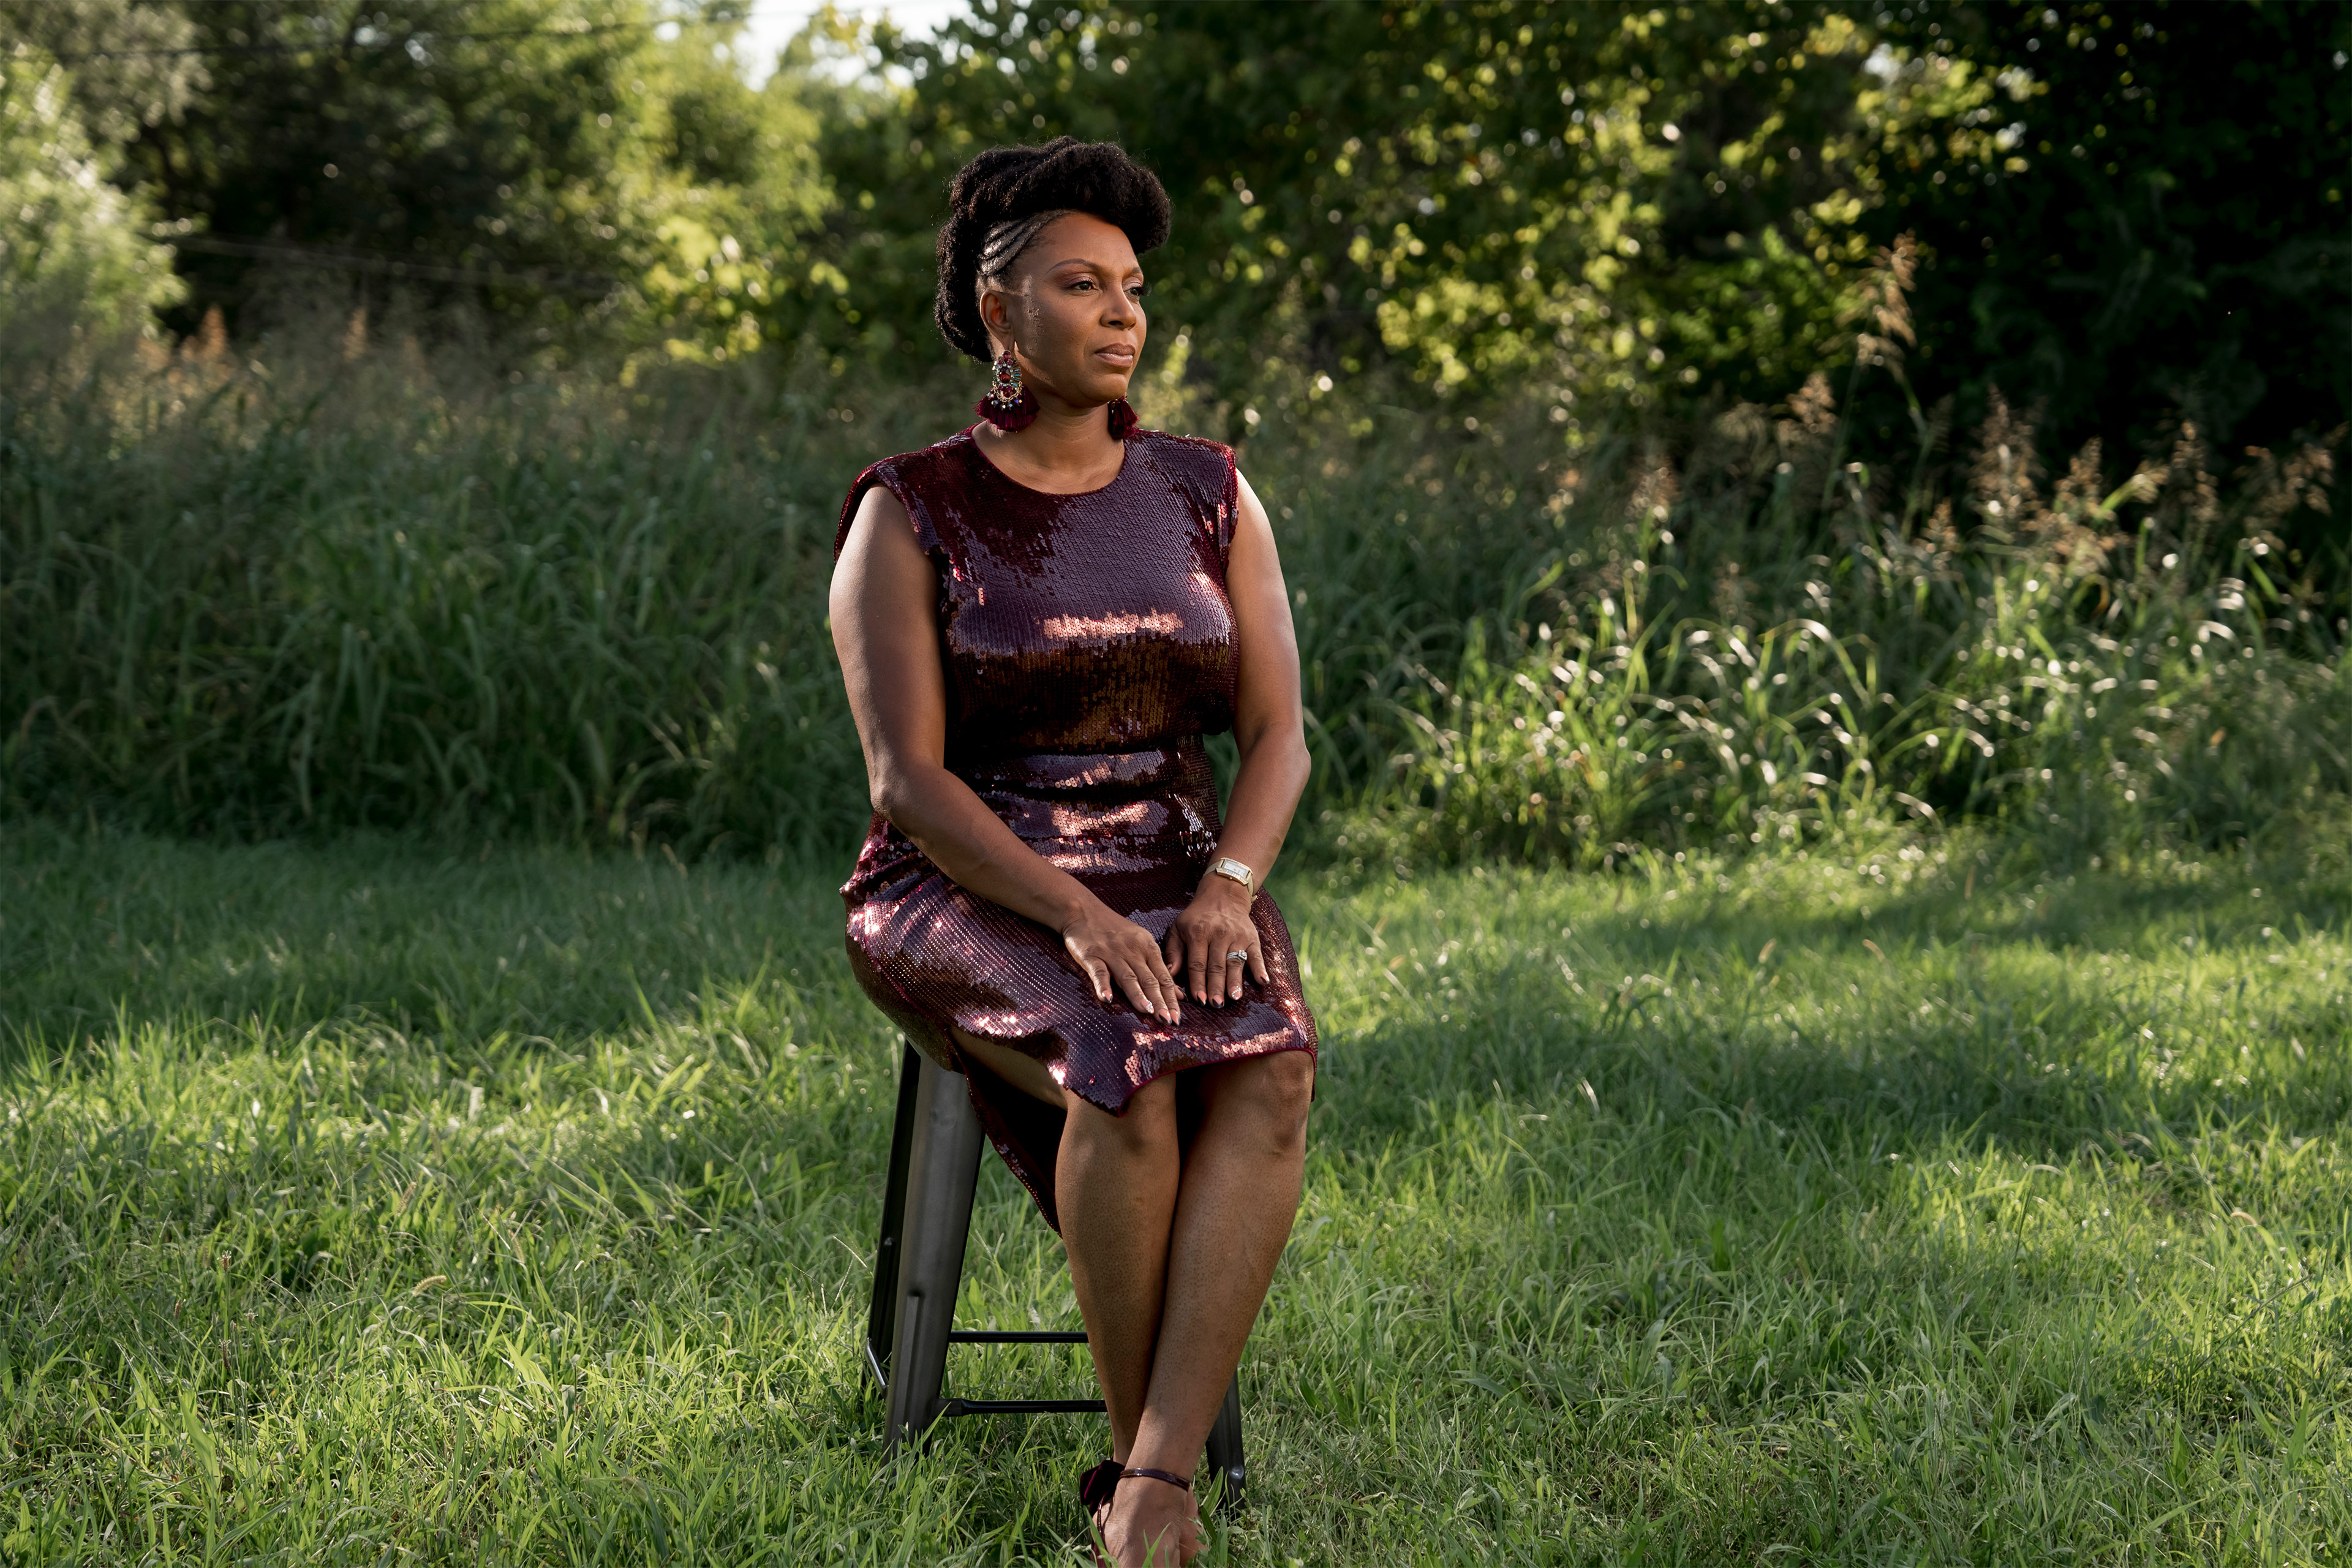 A photo shows Larita Rice-Barnes sitting for a portrait in the field she ran through during a shooting.